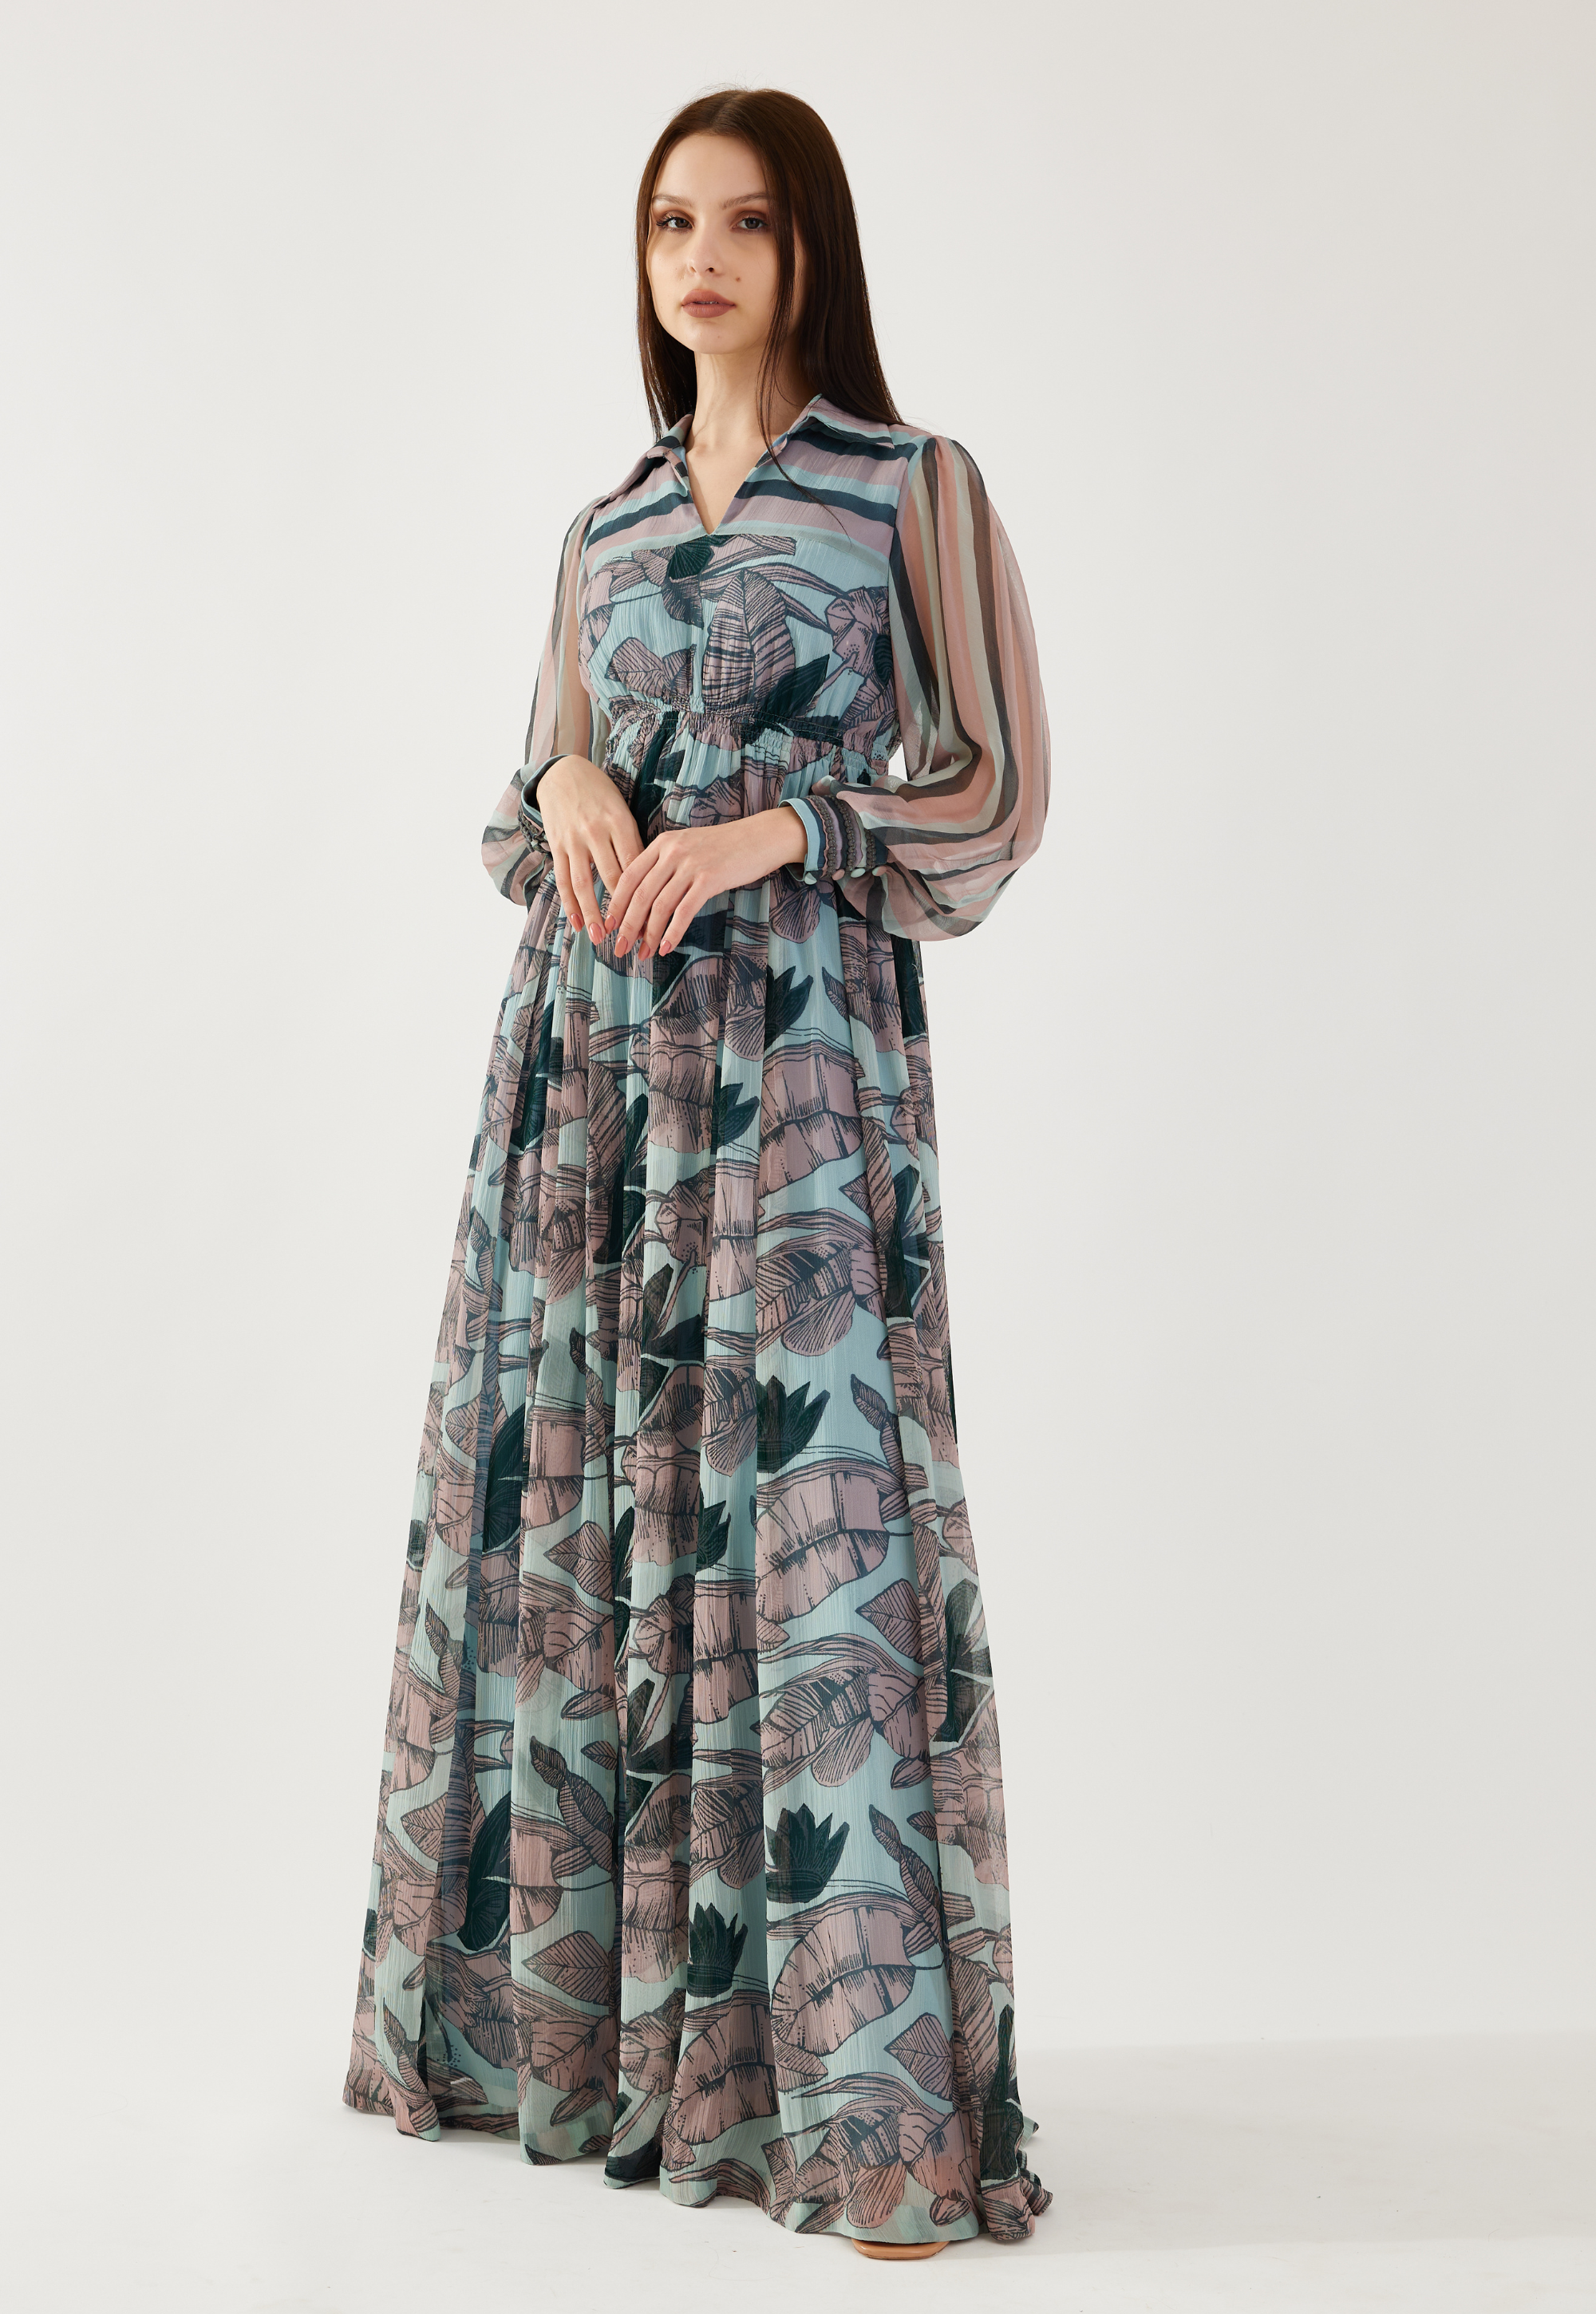 Sky blue, pink and green floral long dress